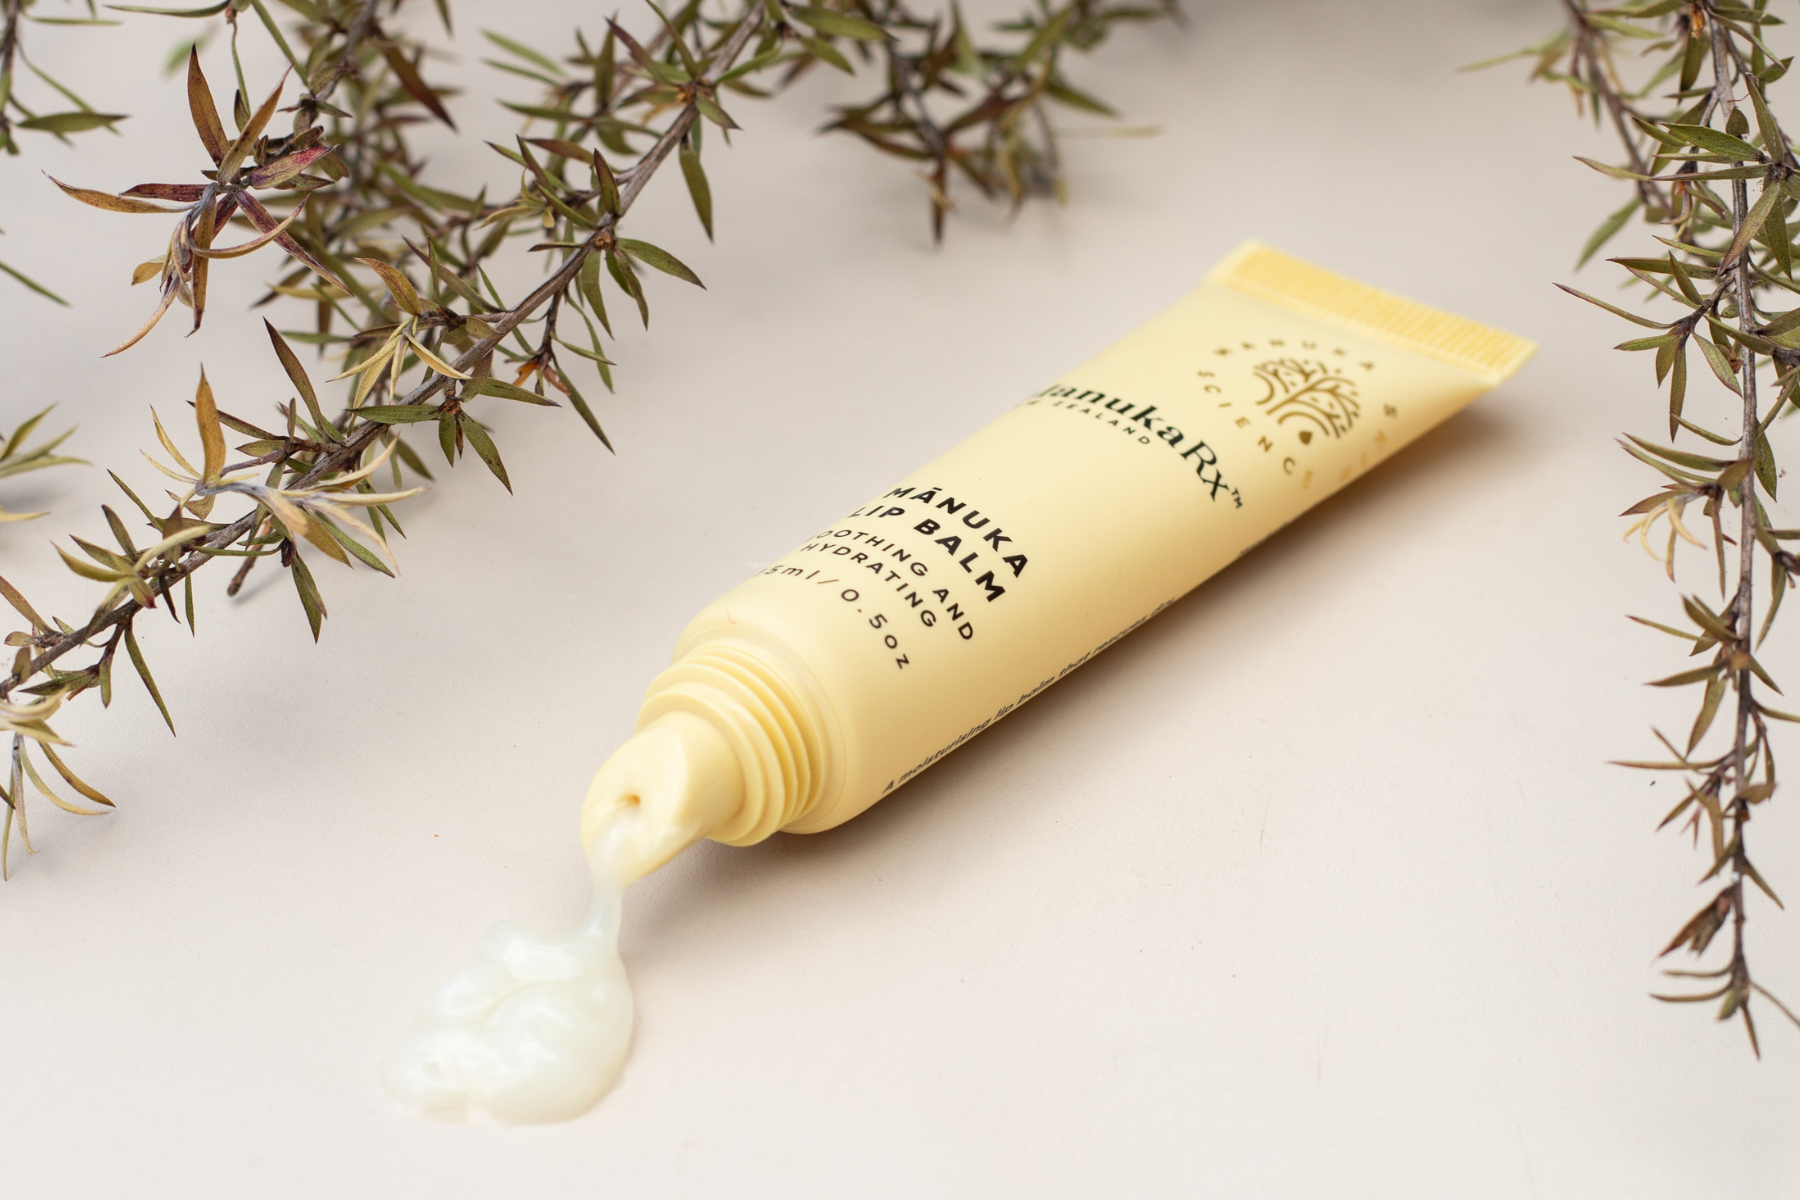 Manuka ointment used for lips in winter